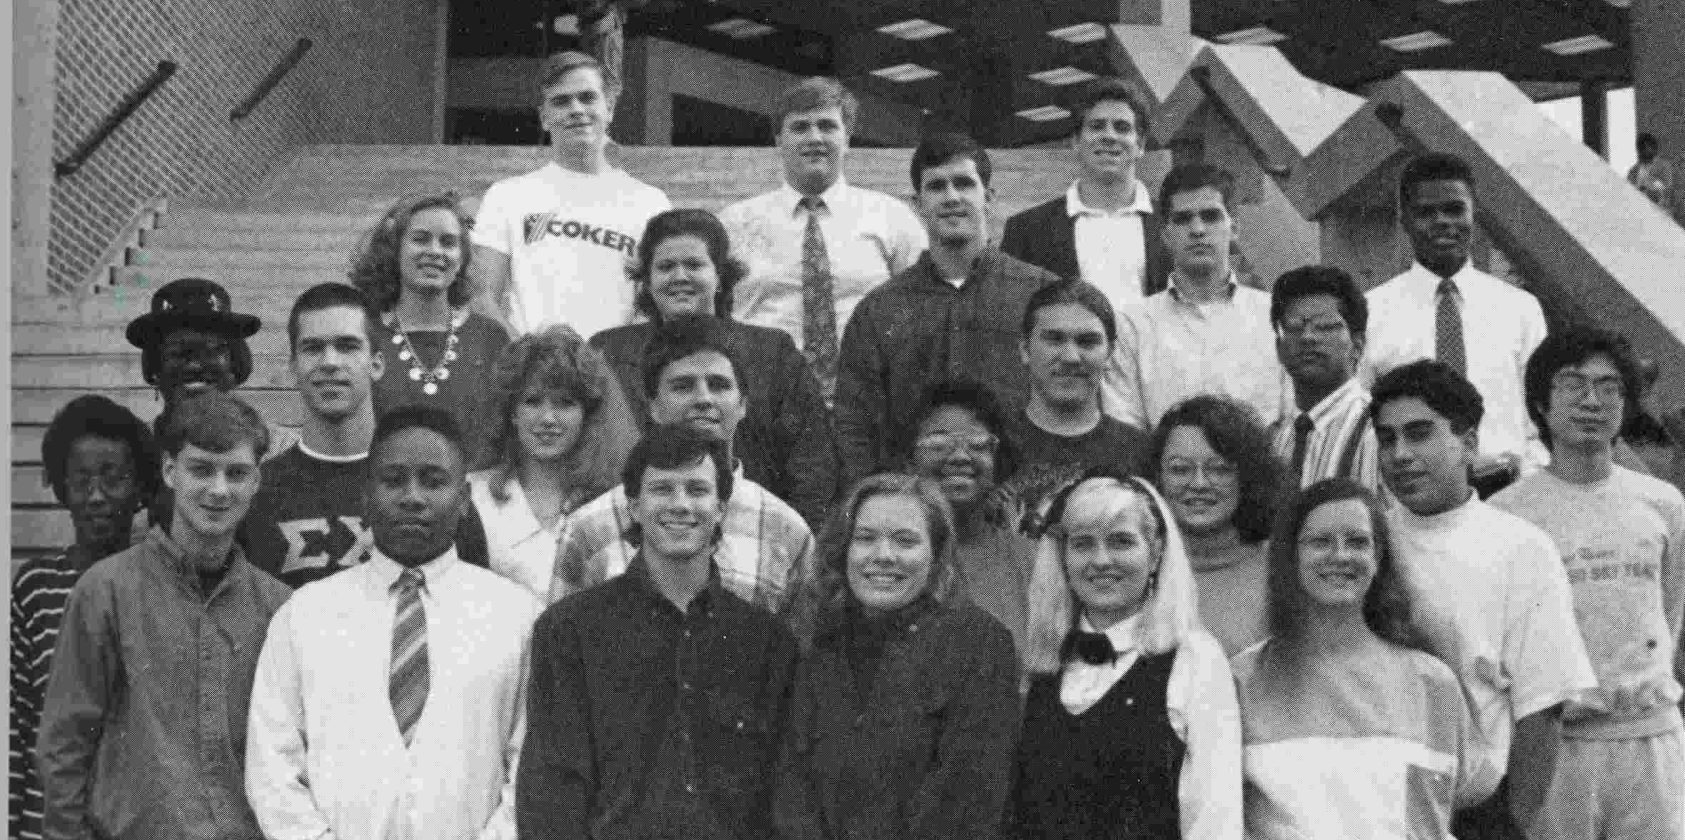 Richard Zhang, far right, pictured in the 1991 Moccasin yearbook along with the other members of the Student Government Association. Courtesy of the University of Tennessee at Chattanooga Special Collections.